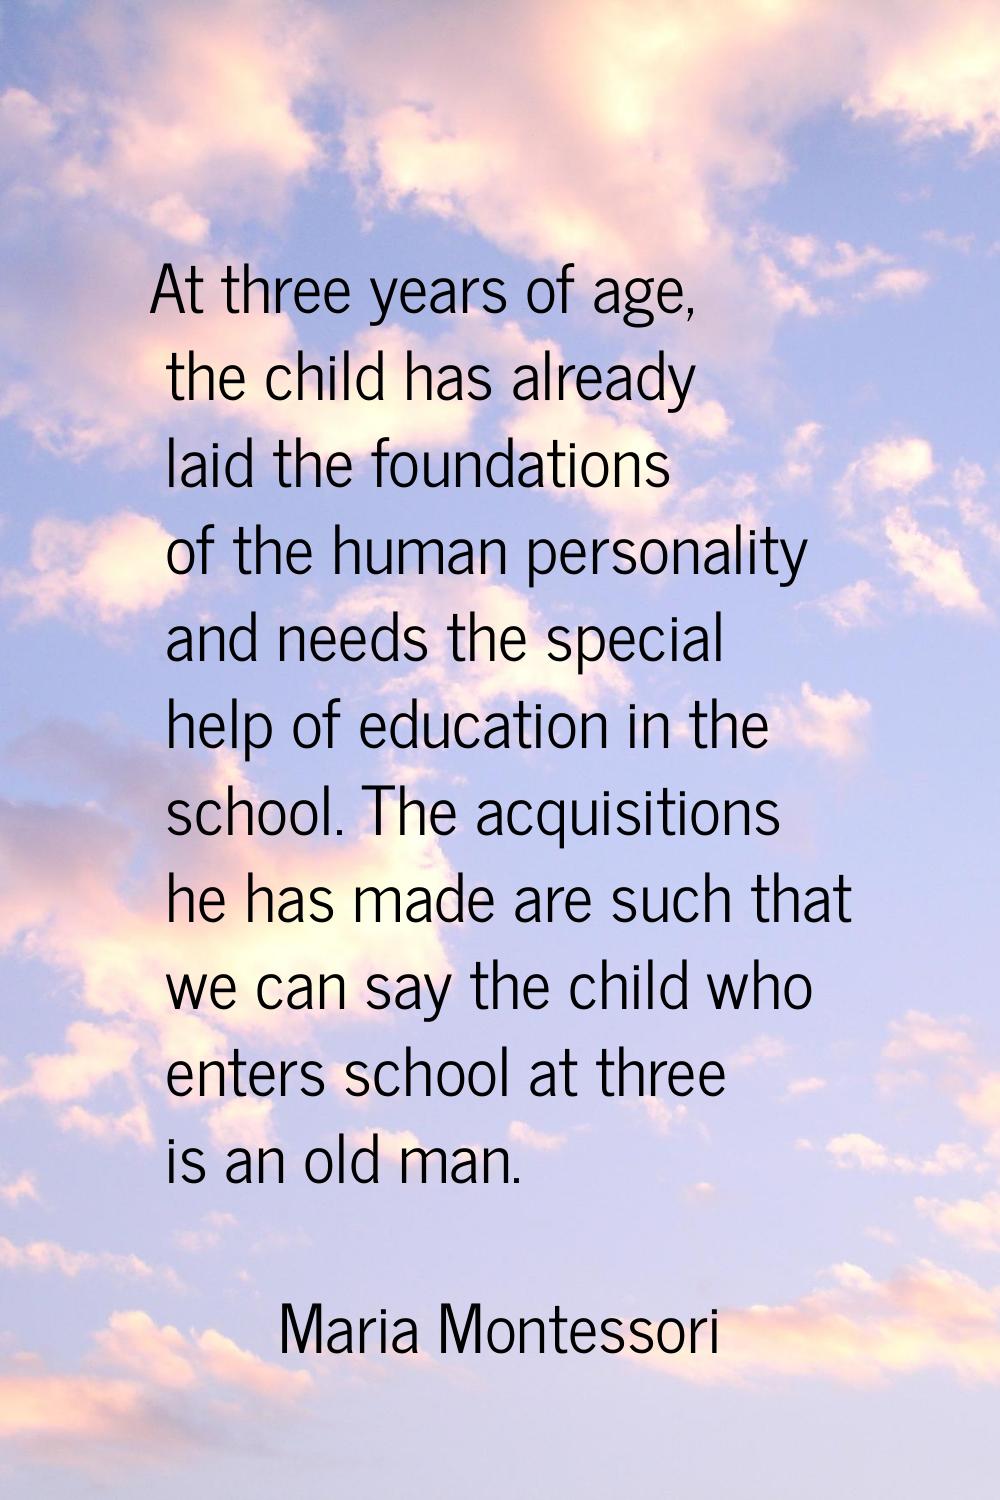 At three years of age, the child has already laid the foundations of the human personality and need